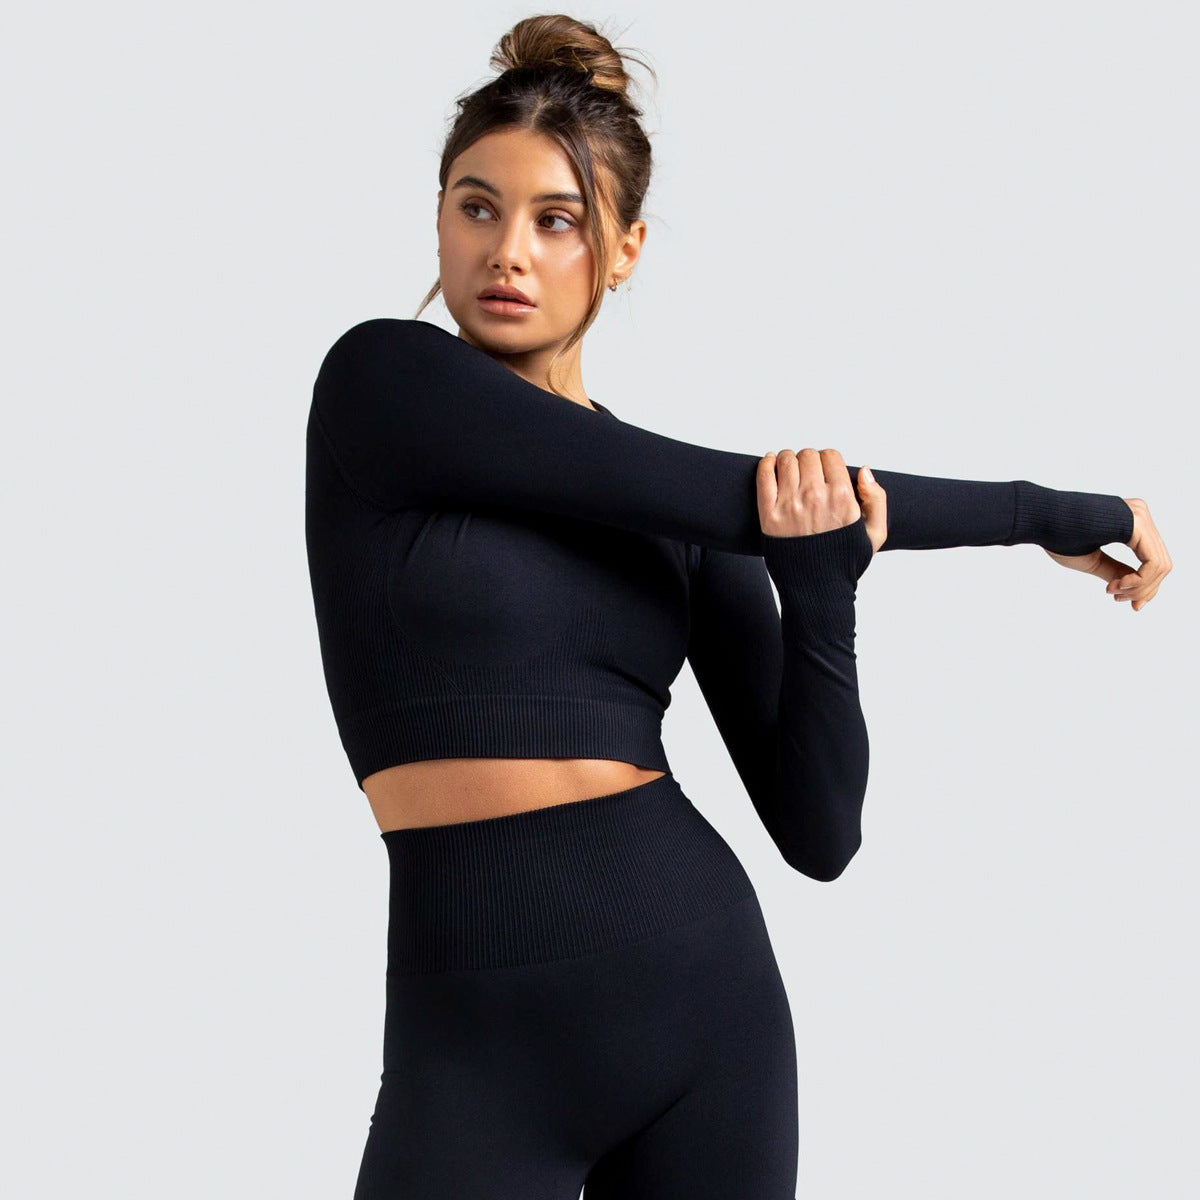 Seamless Slim-Fit Workout Top (only) - Activewear - Sports Tops - malbusaat.co.uk